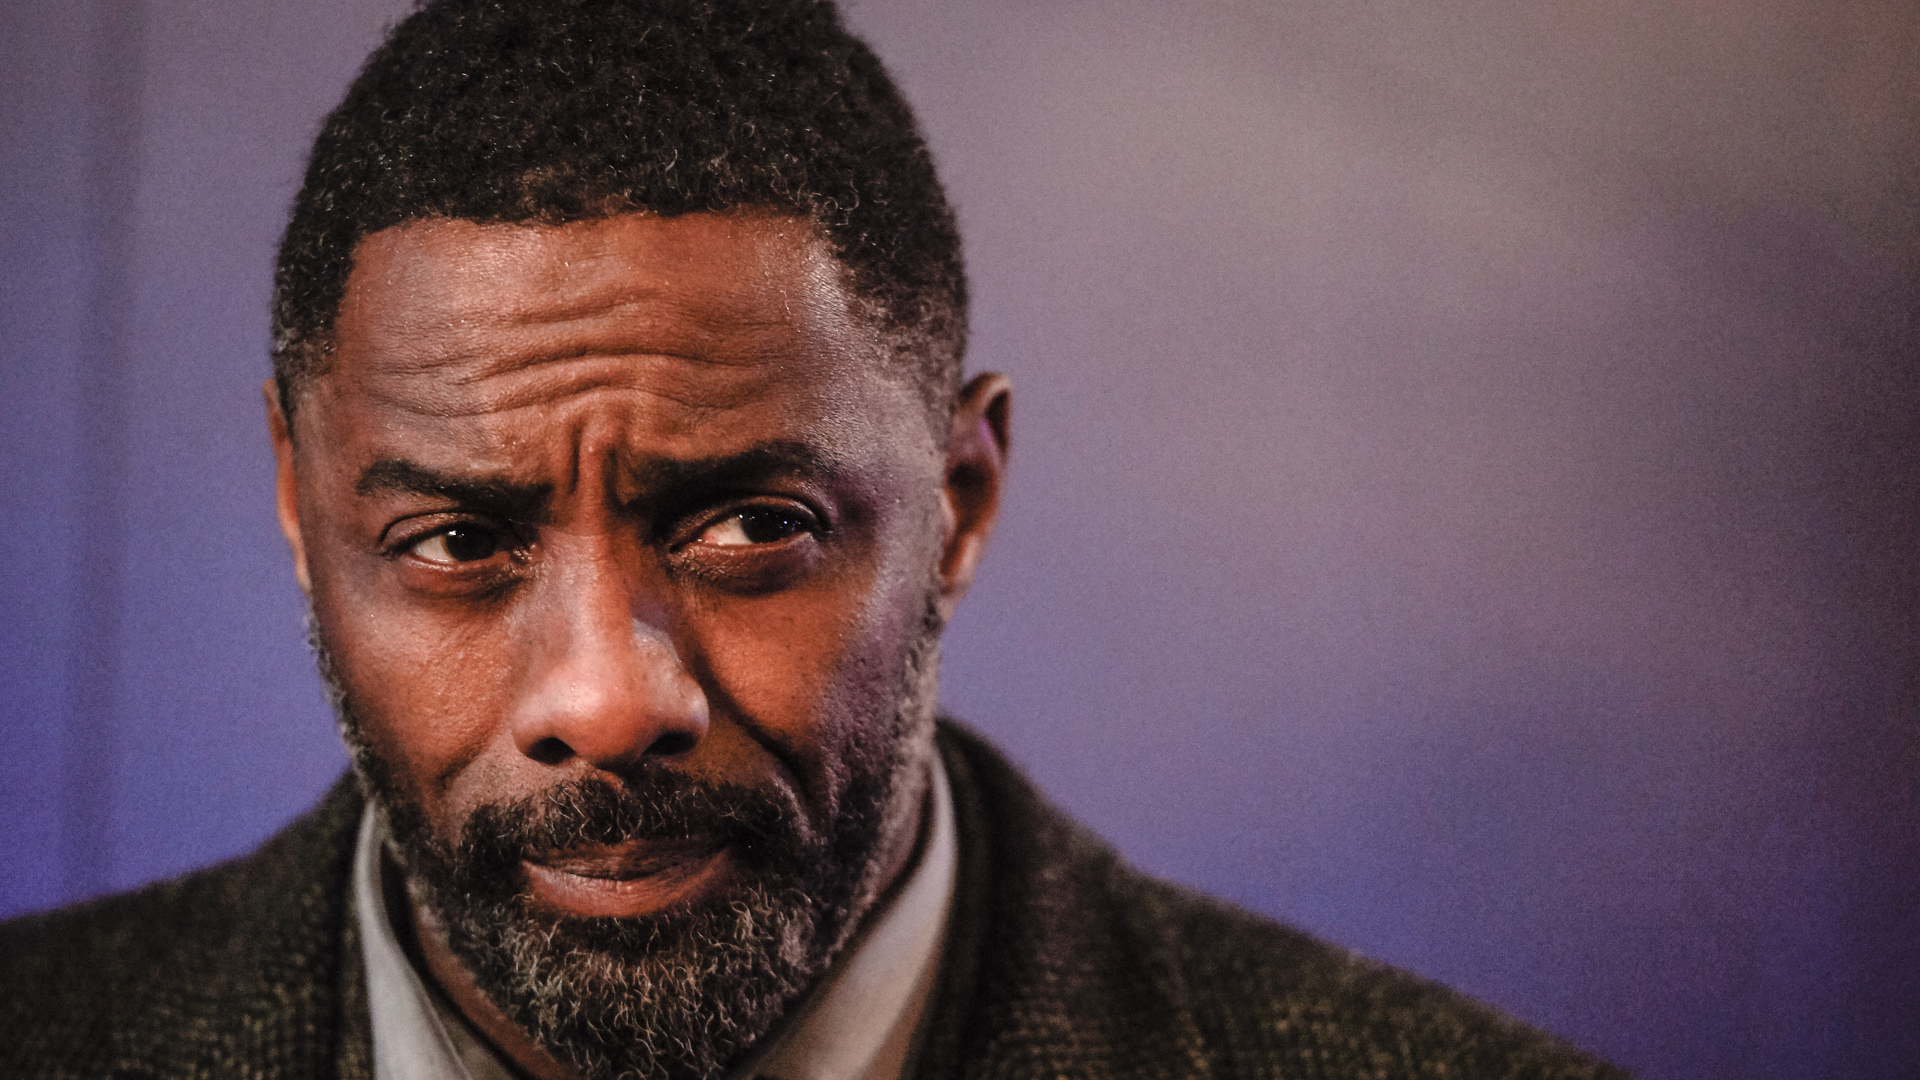 Luther movie - Idris Elba as DCI John Luther